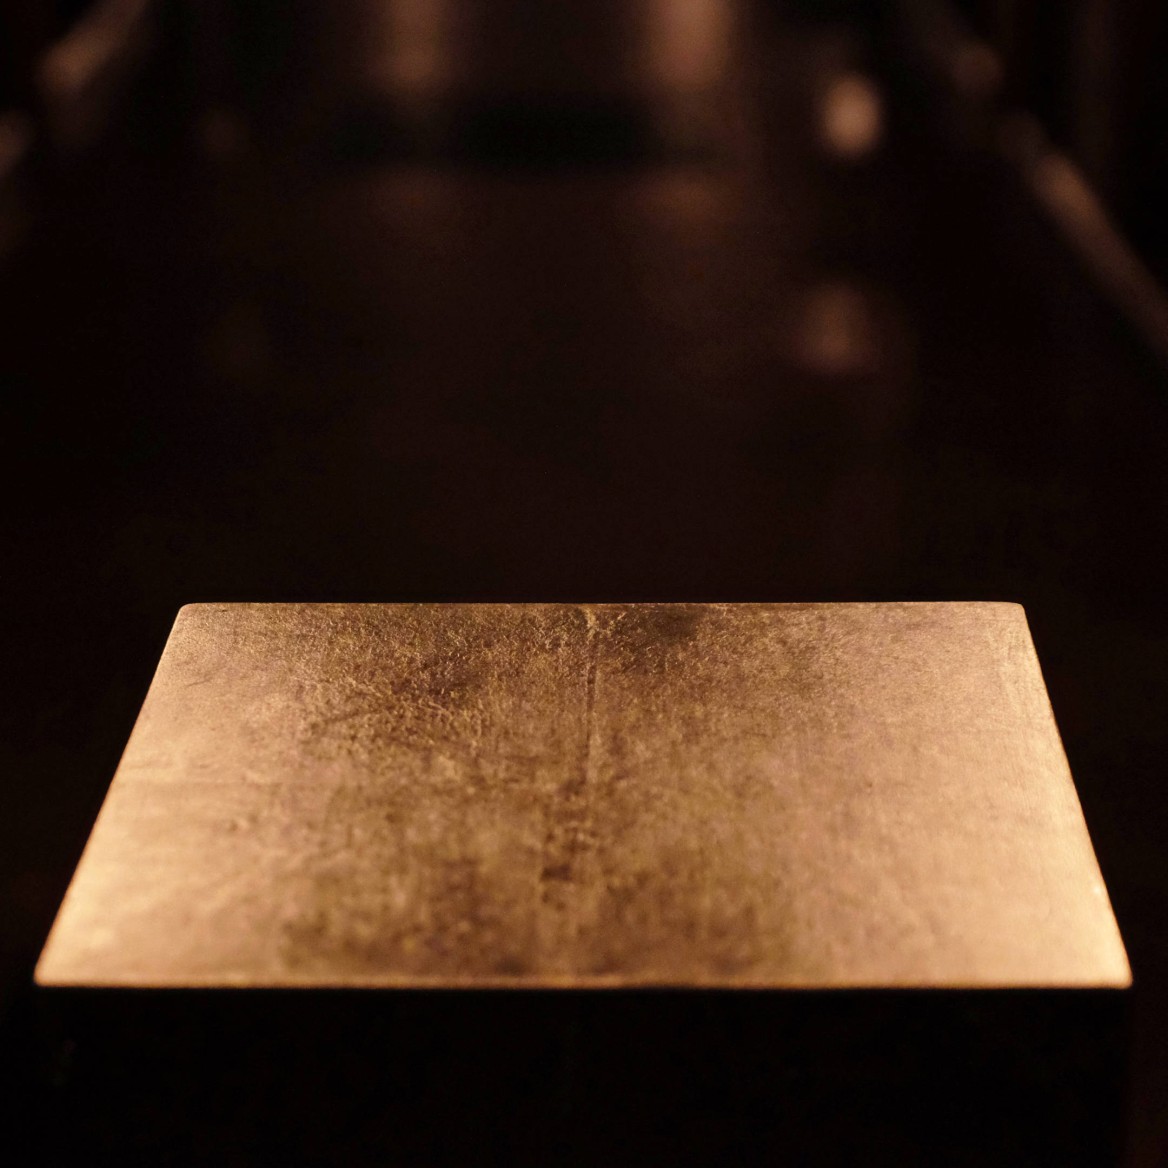 Close-up photo shows the top of a golden cube illuminated by the interior lights of the church